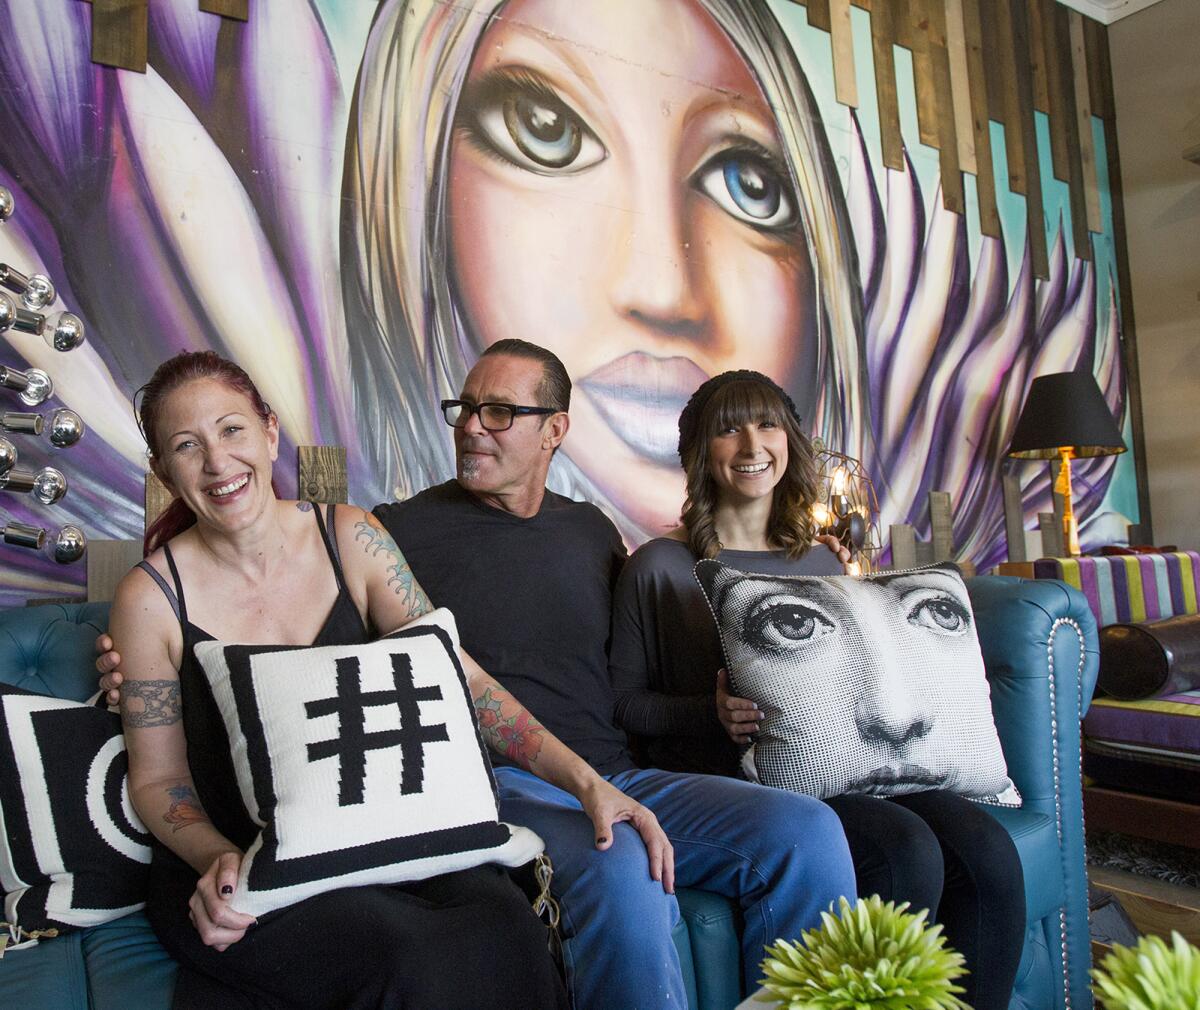 Davis Ink Ltd. owners Andrea, left, and husband Davis Krumins, center, and lead designer Sara Hernandez pose for a portrait at their office located along the 1600 block of Superior Avenue in Costa Mesa. The company creates interior designs for hospitality and nightclub venues.